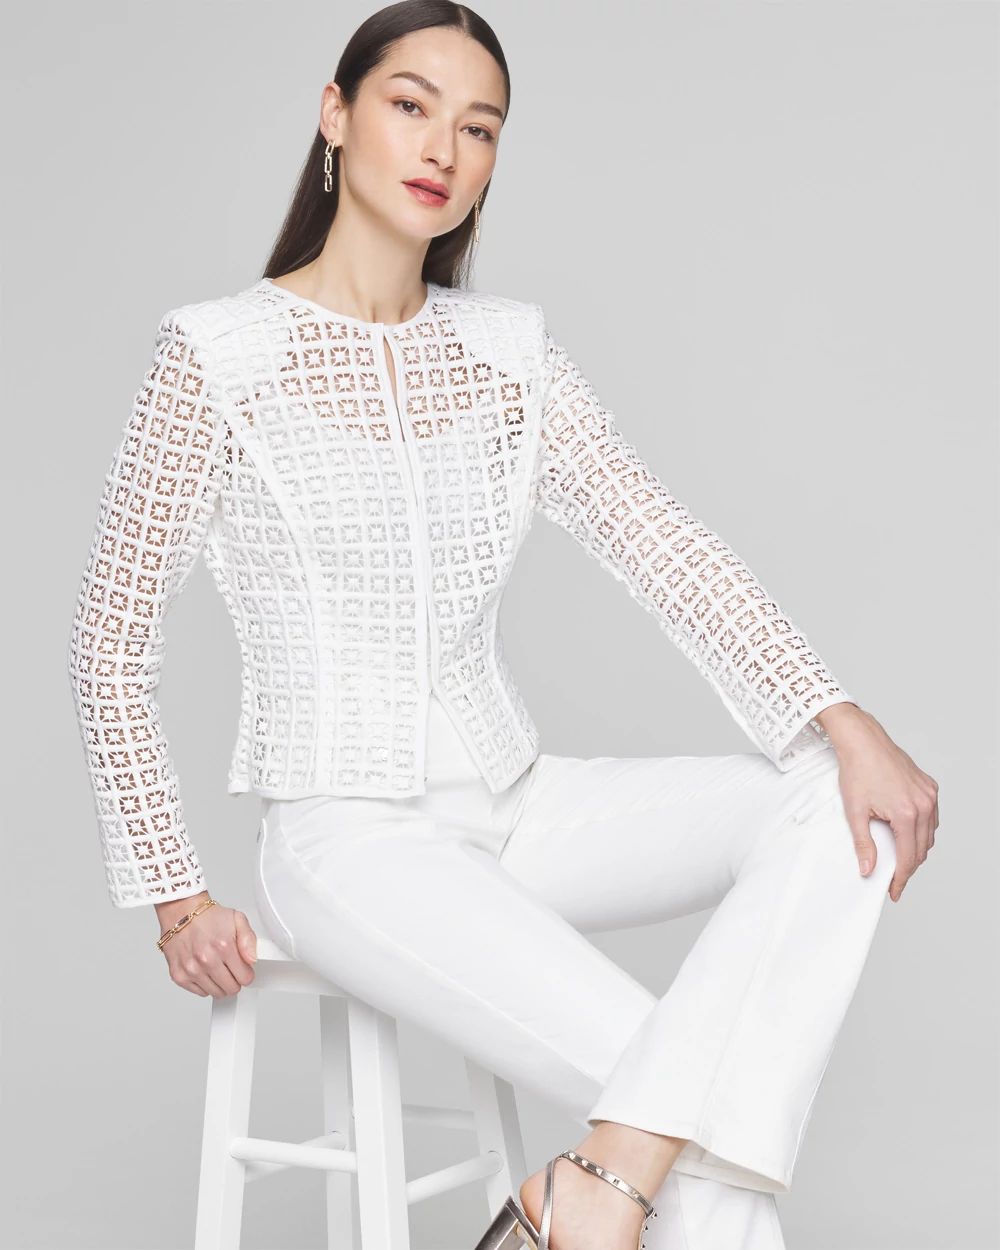 Openwork Geo Lace Jacket click to view larger image.